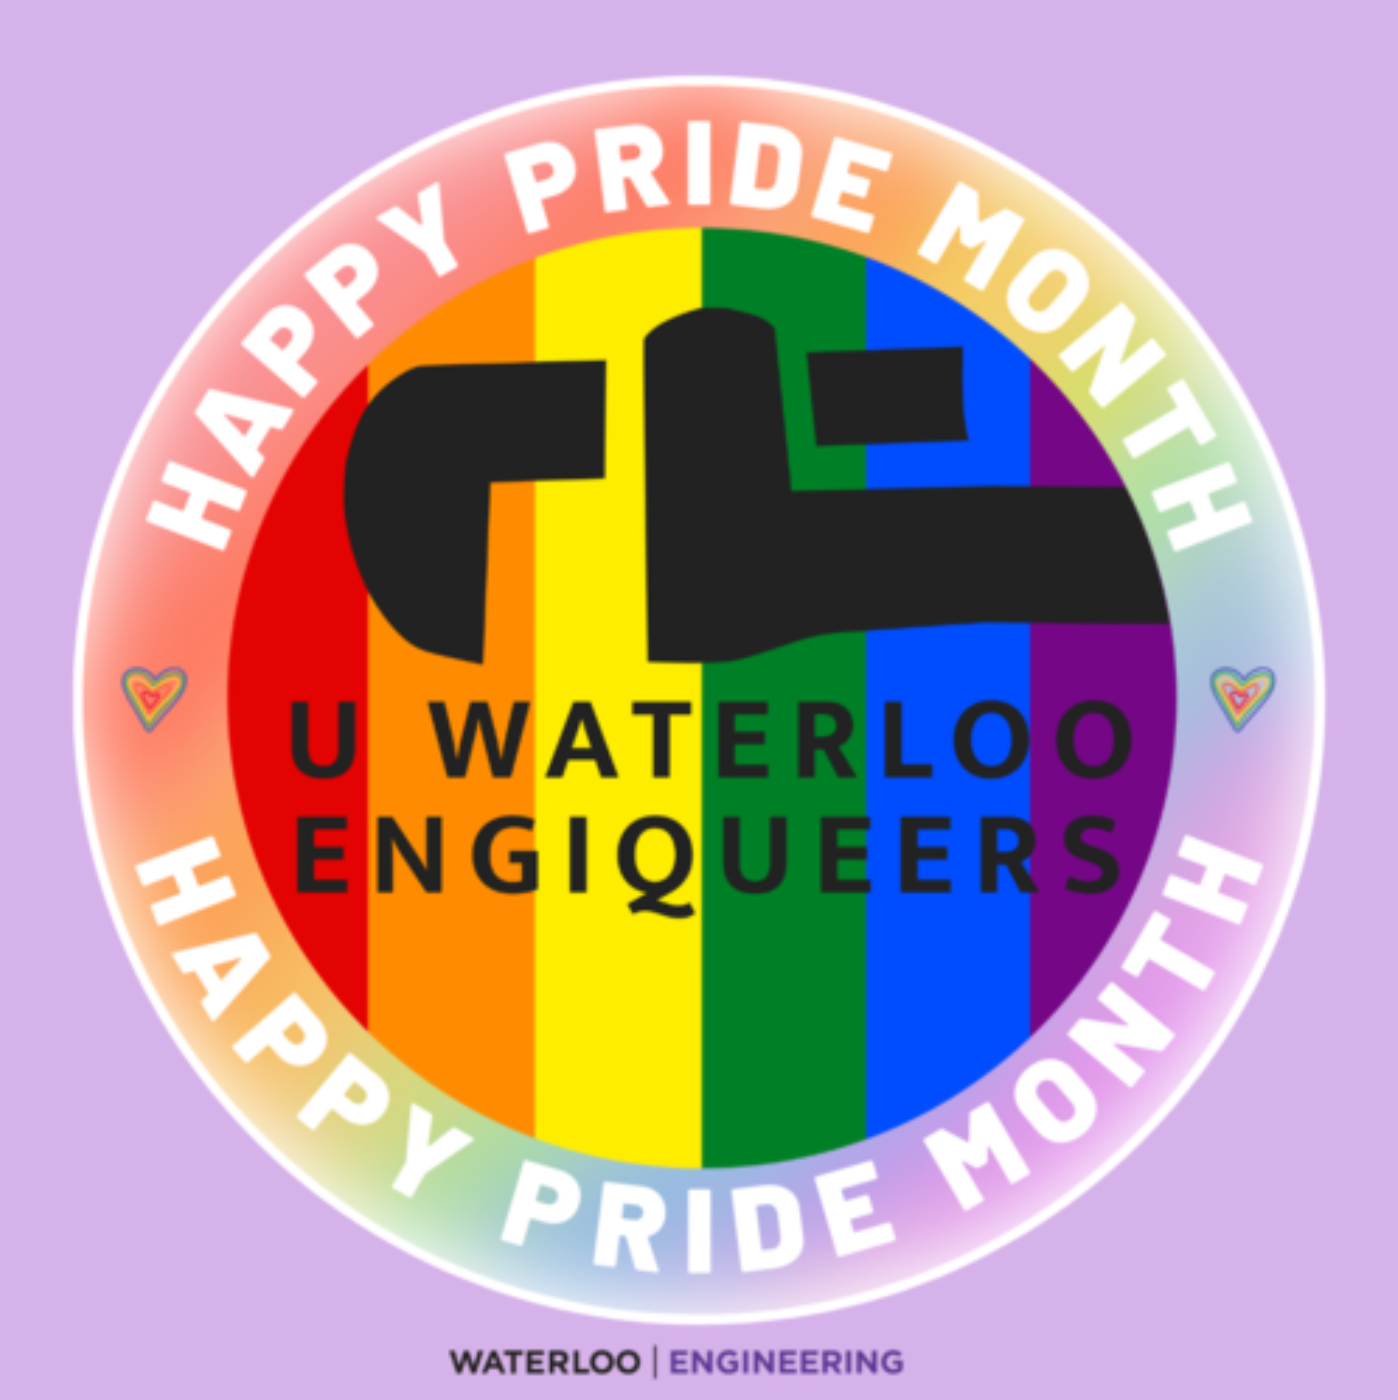 Hppy Pride Month - UWaterloo EngiQueers